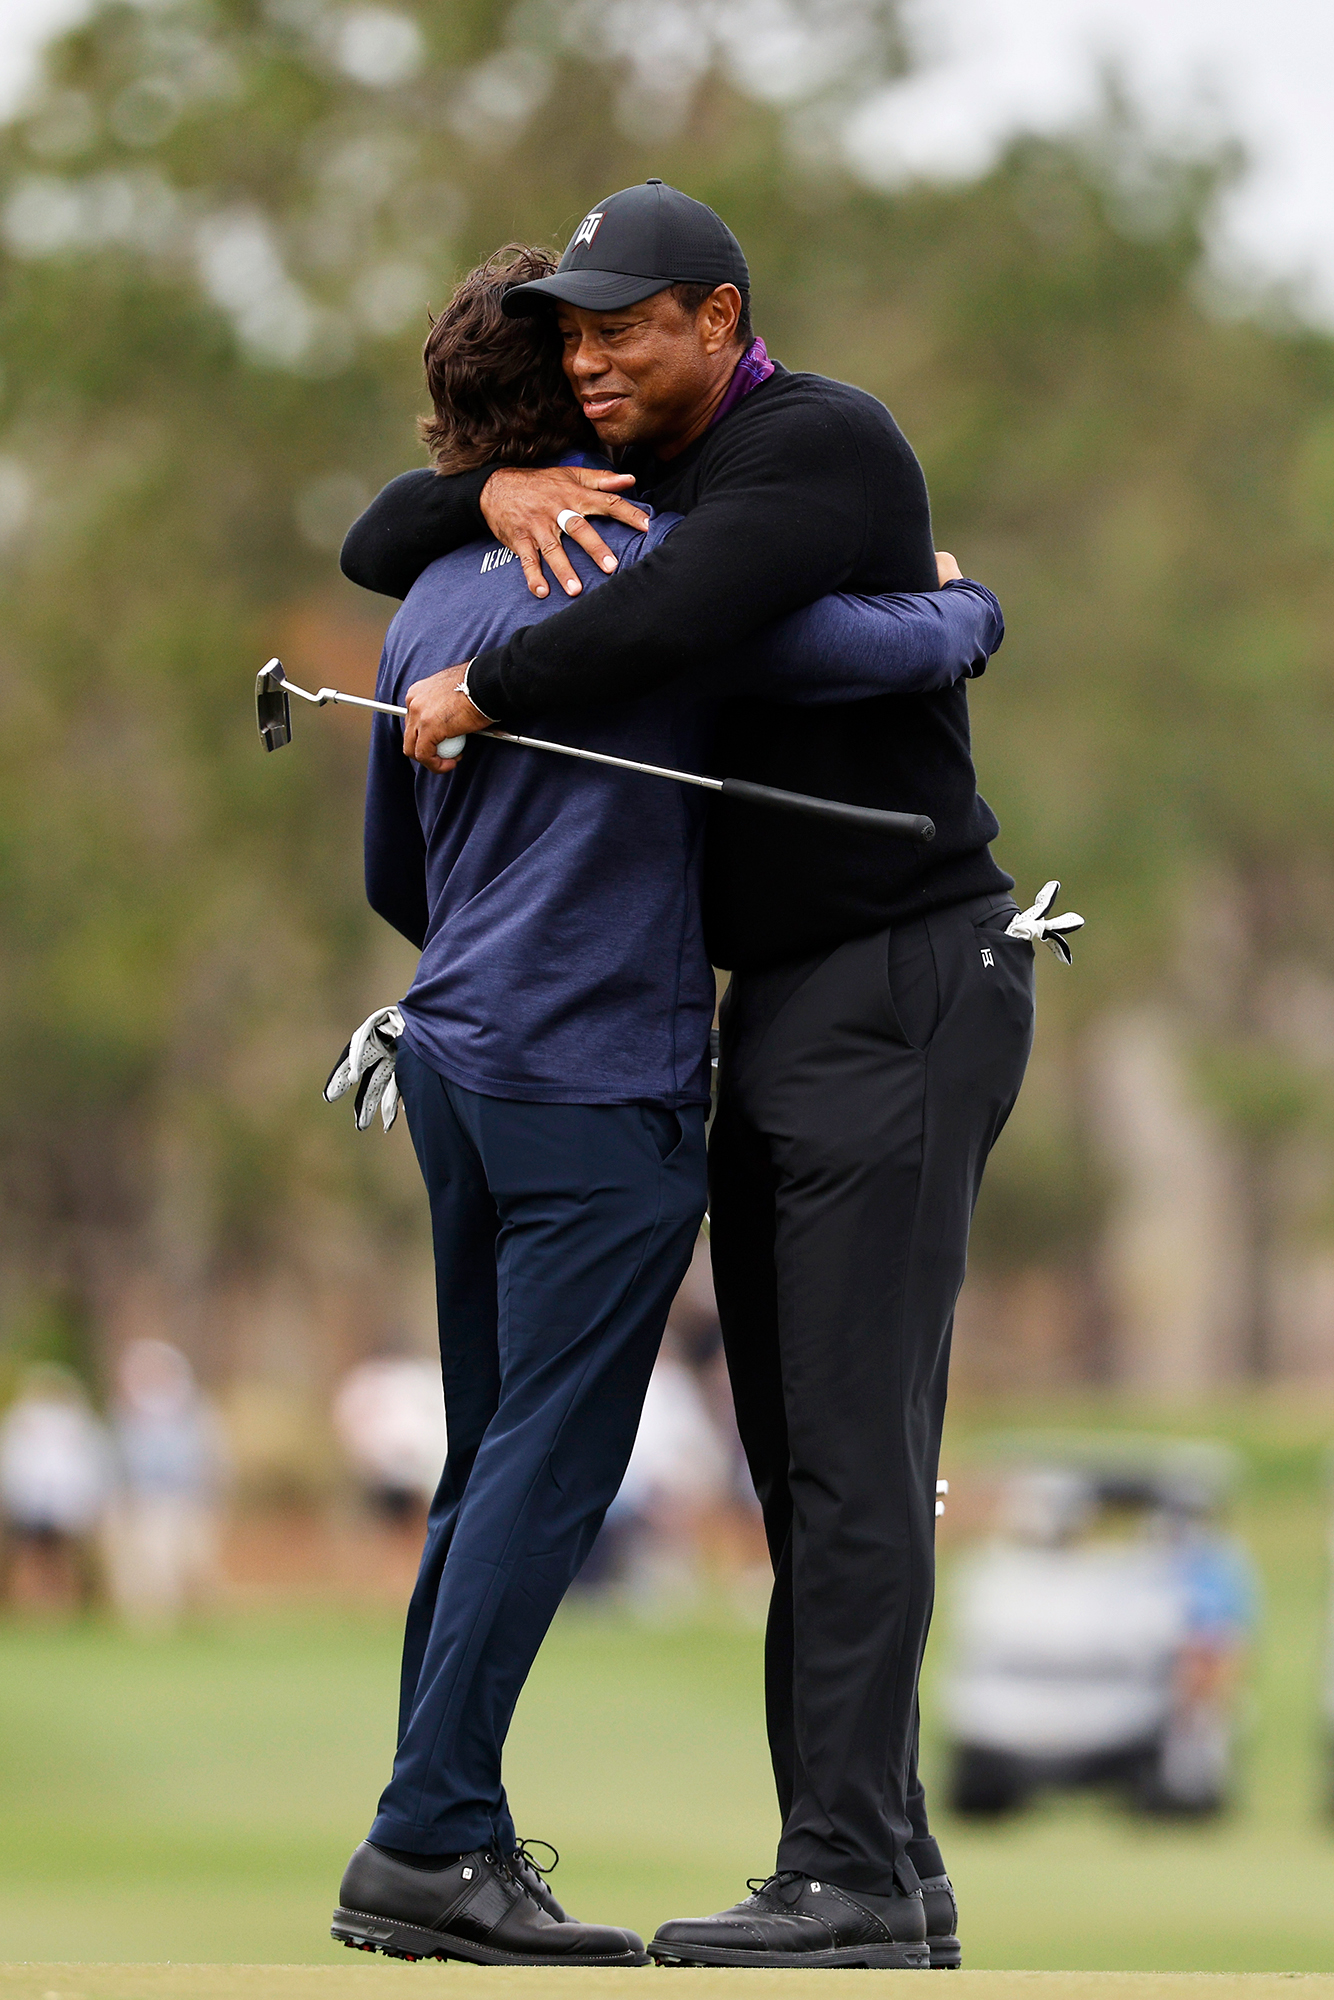 Tiger Woods' Children Share Heartwarming Moment at PNC Championship: A ...